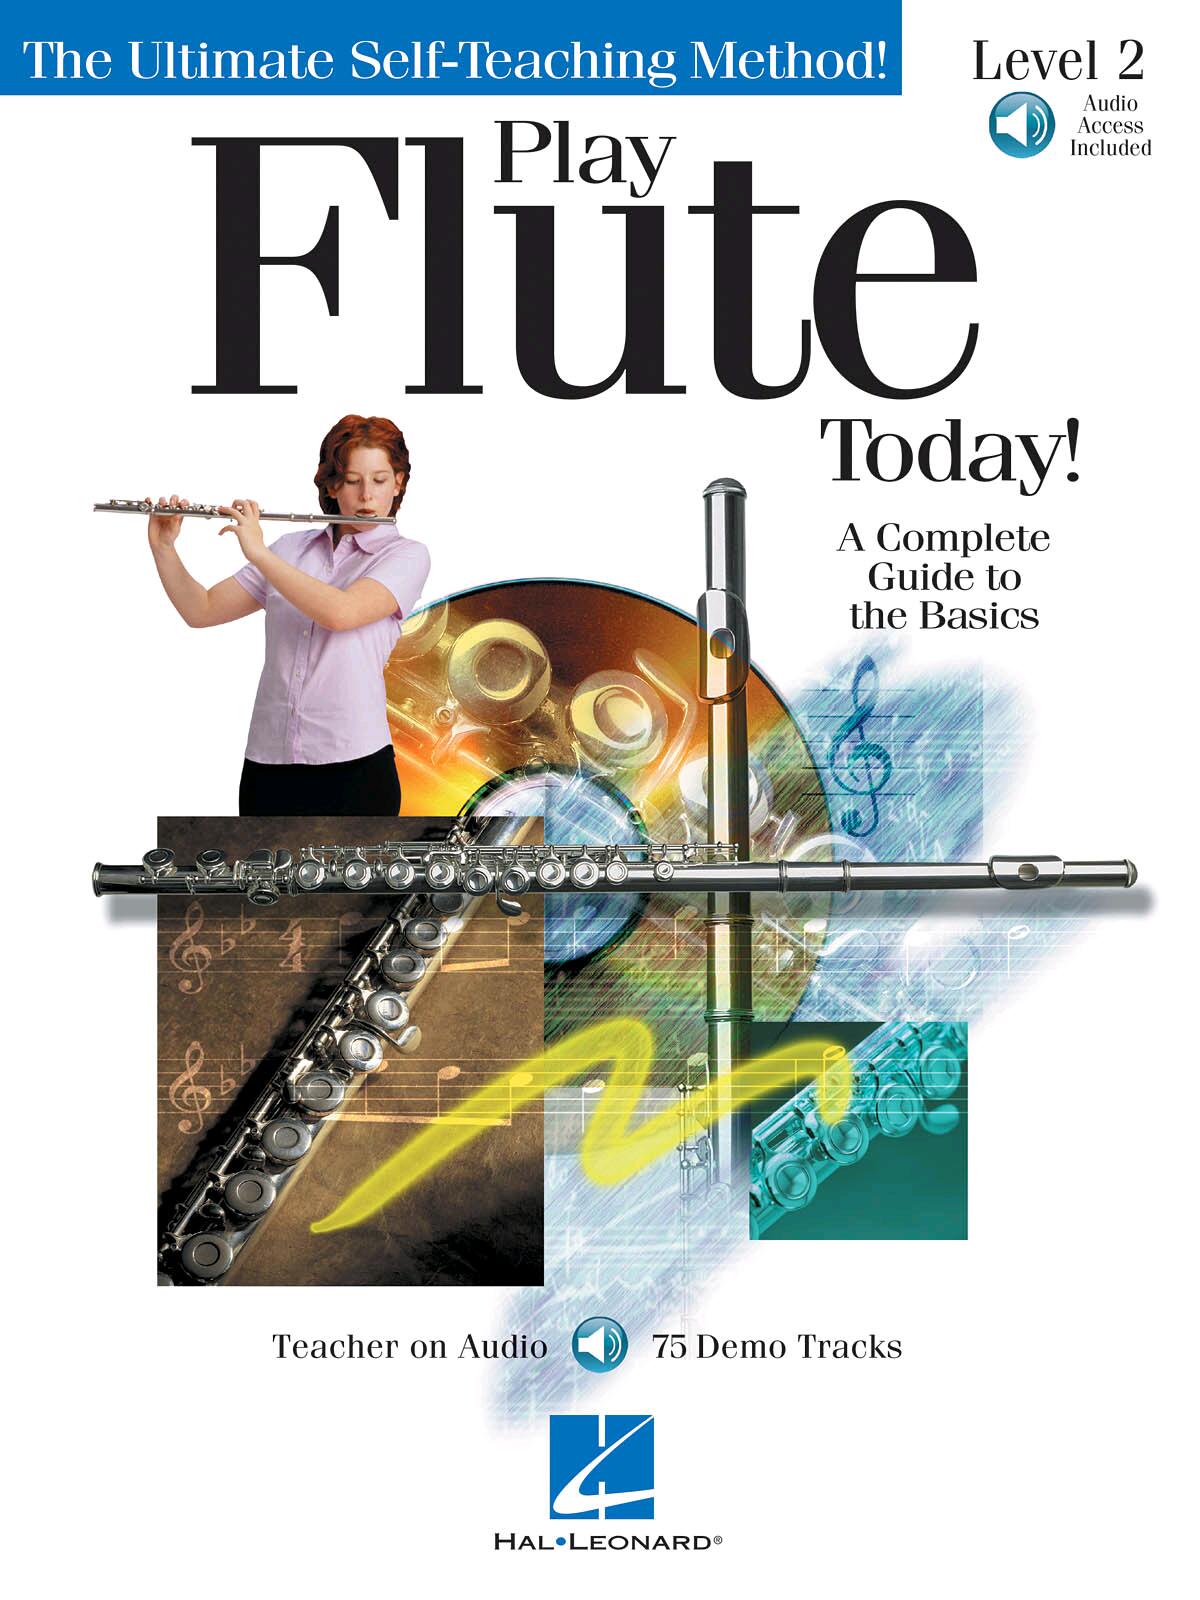 Play Flute Today  Level 2 : photo 1